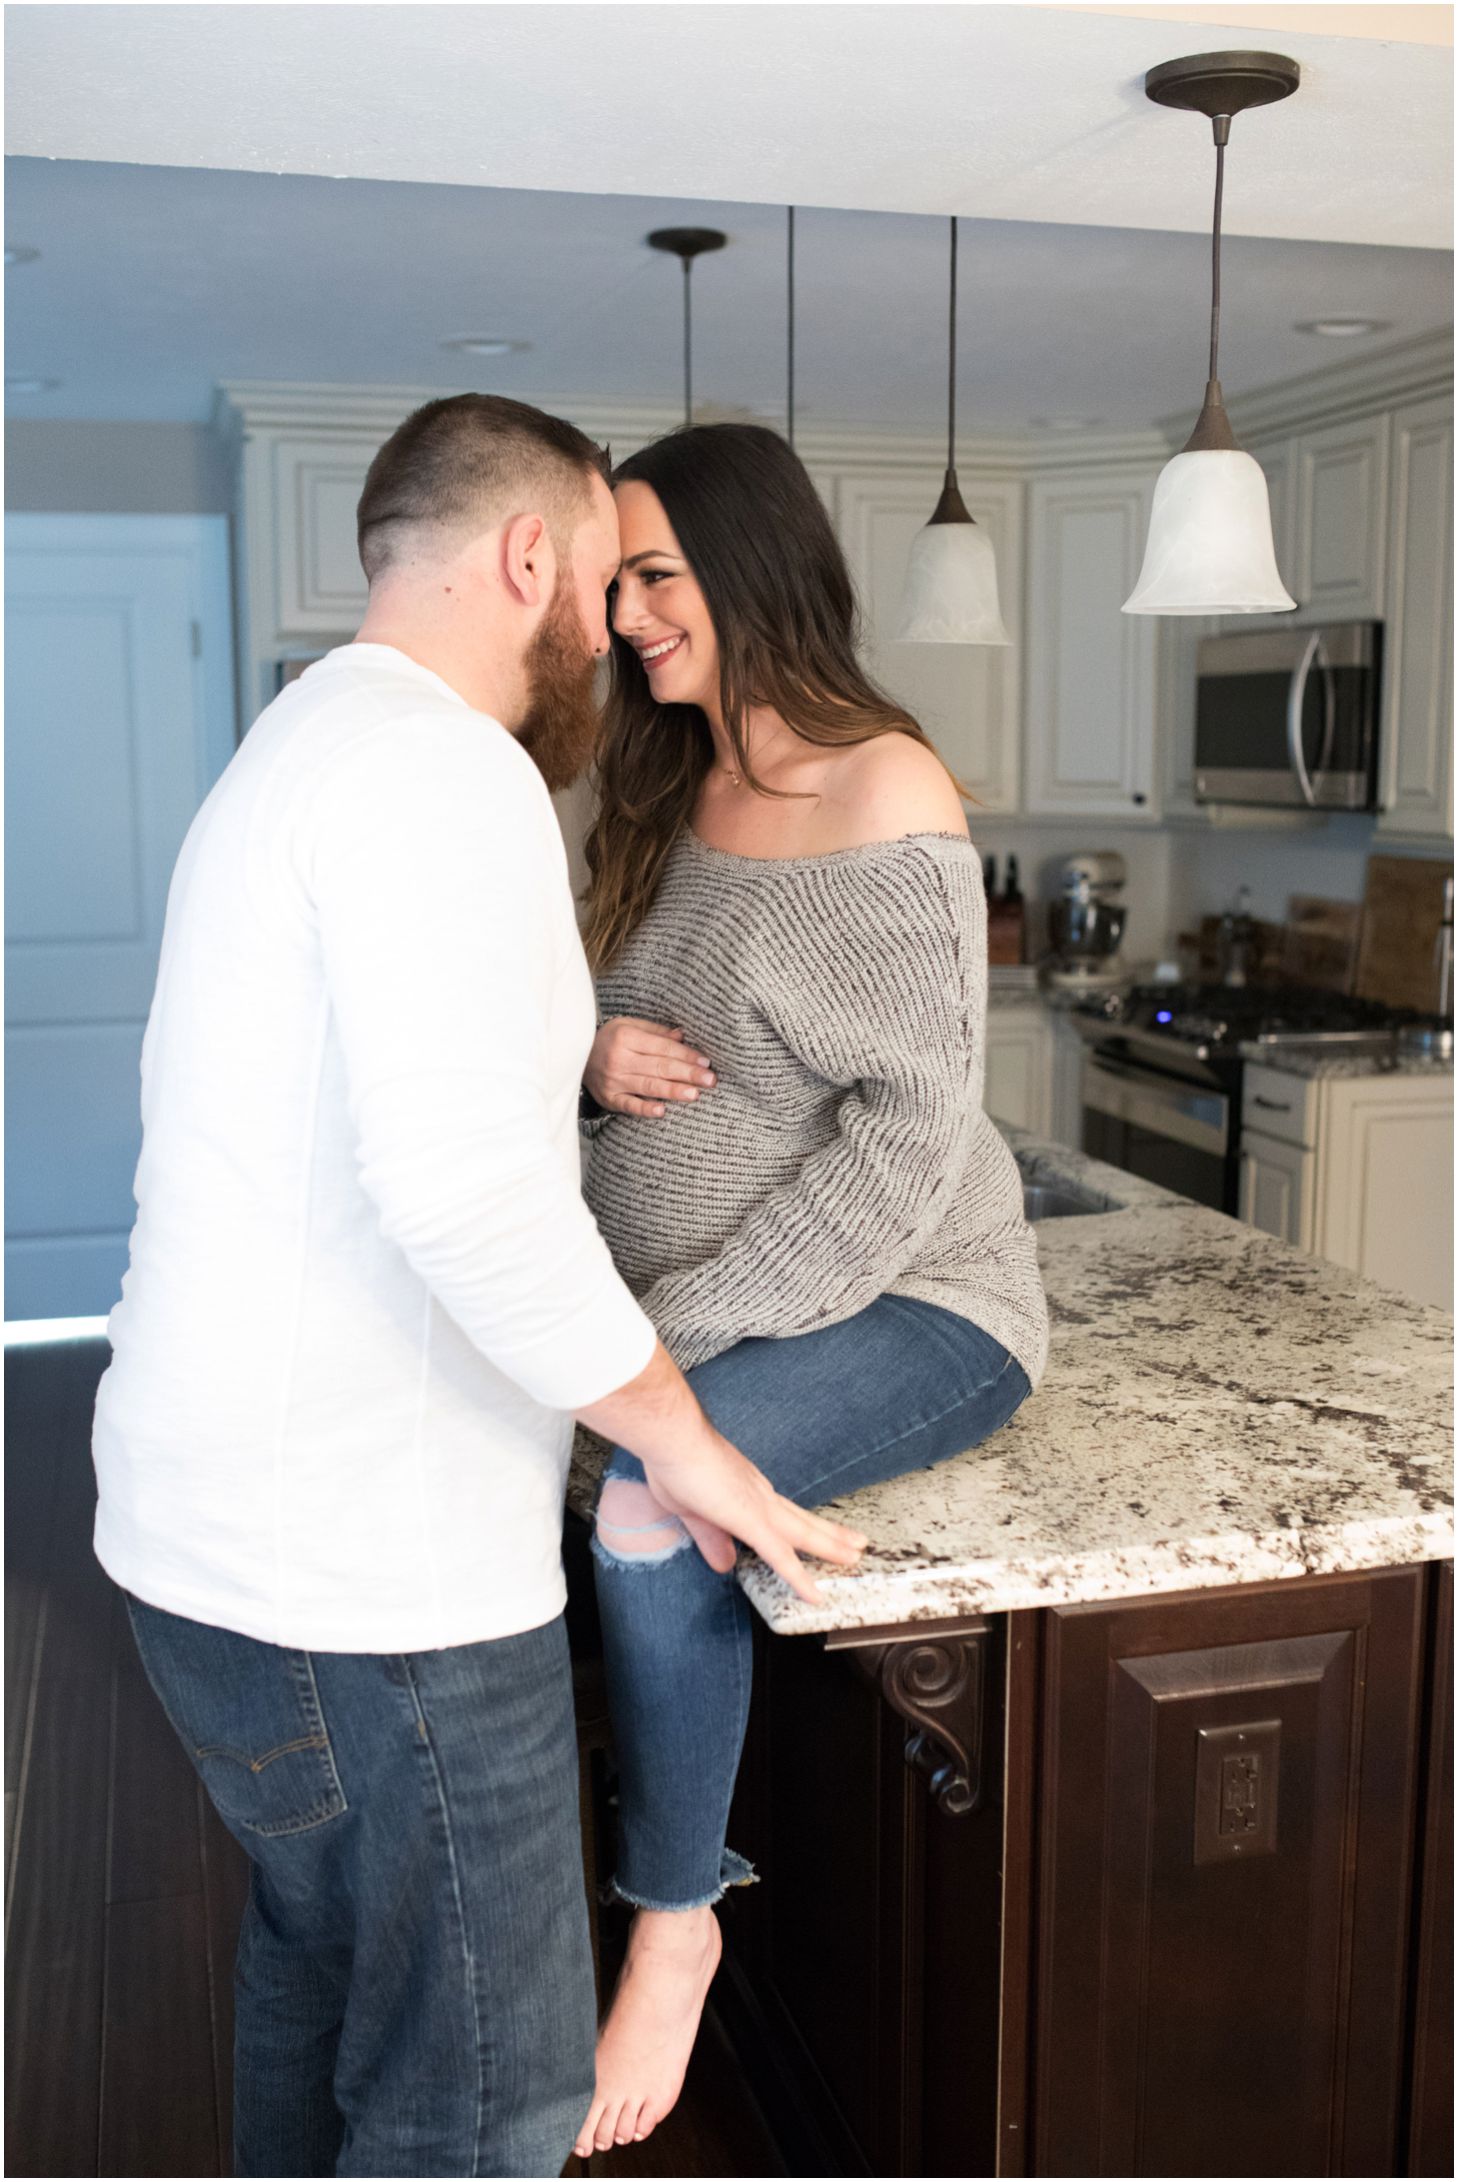 mom and dad snuggle up together in the kitchen | maternity session